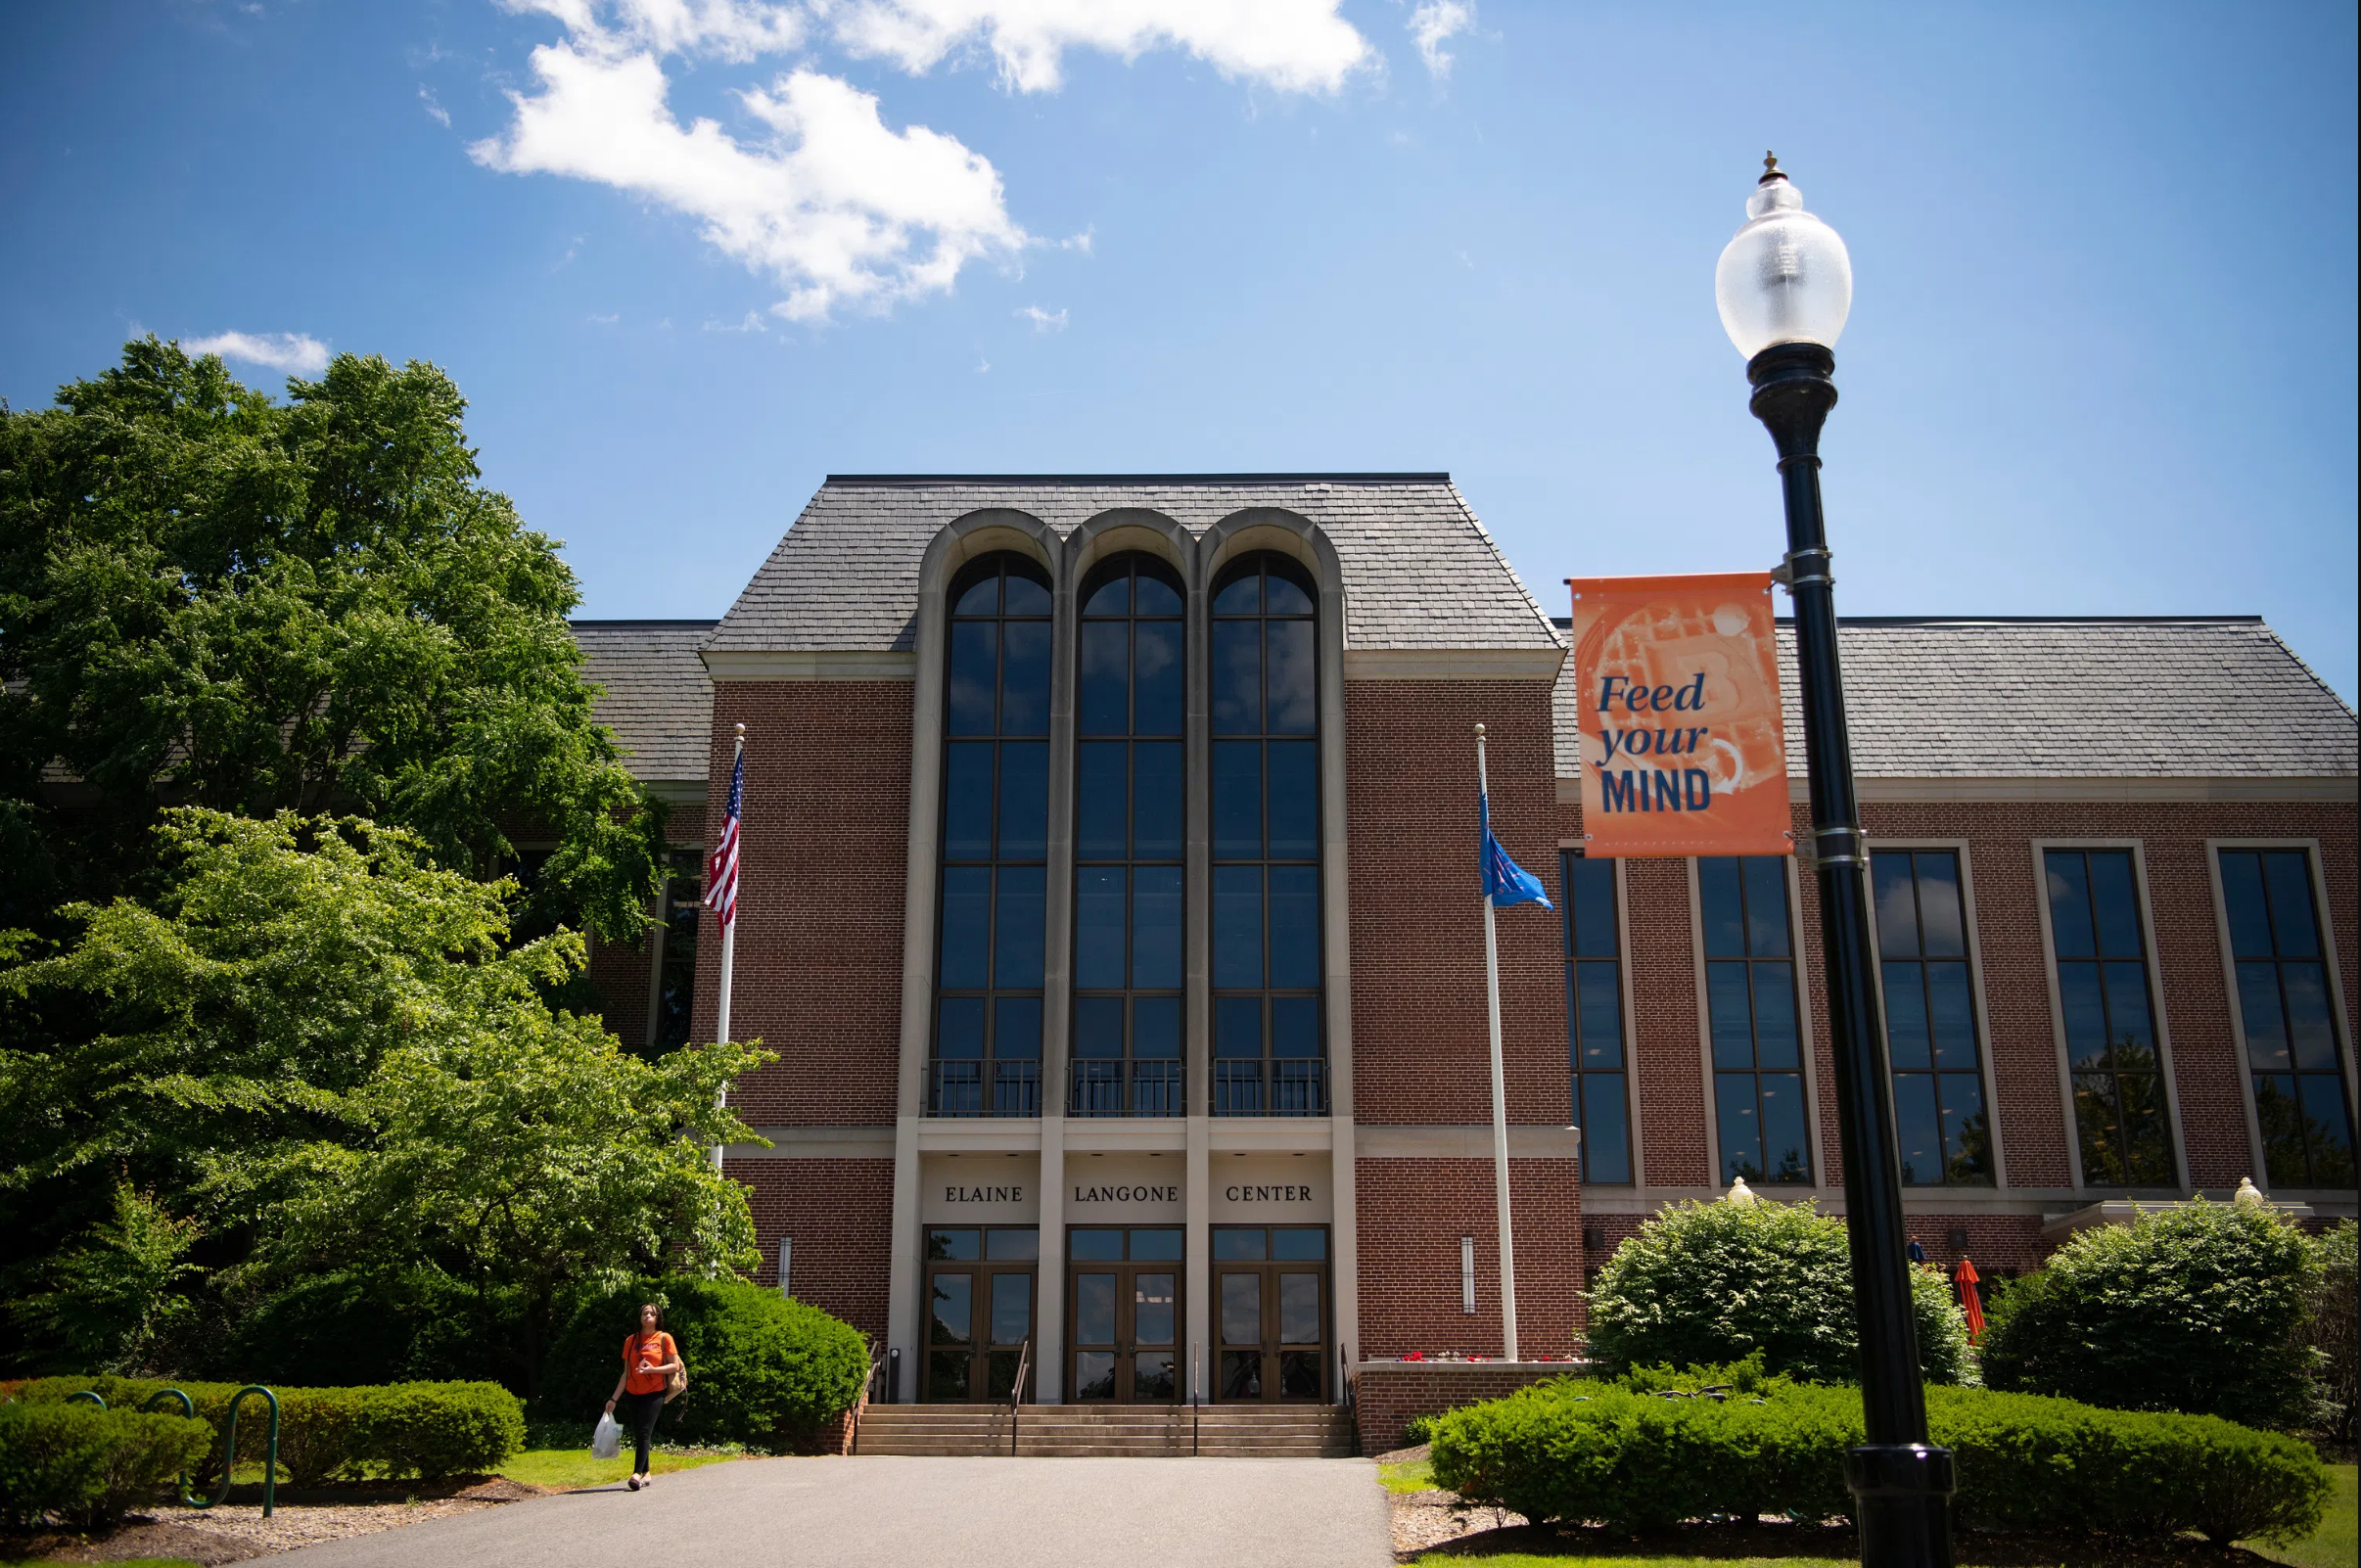 The Elaine Langone Center on Bucknell's campus, a multi-story brick building with tall window.